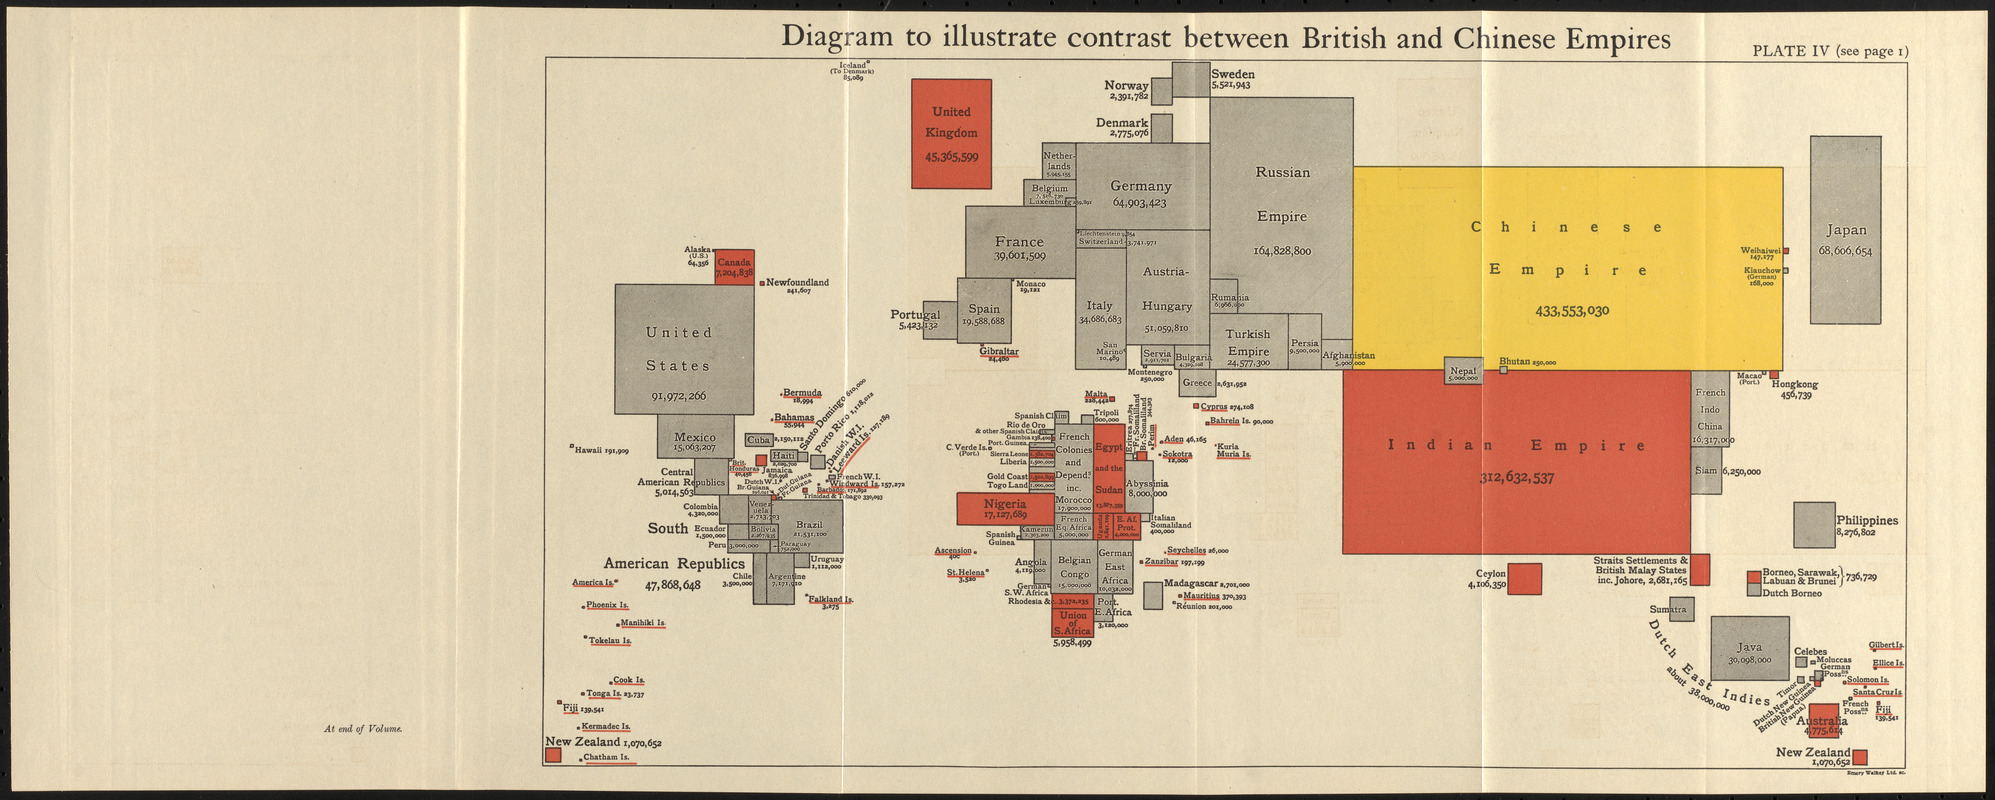 Diagram to illustrate contrast between British and Chinese Empires